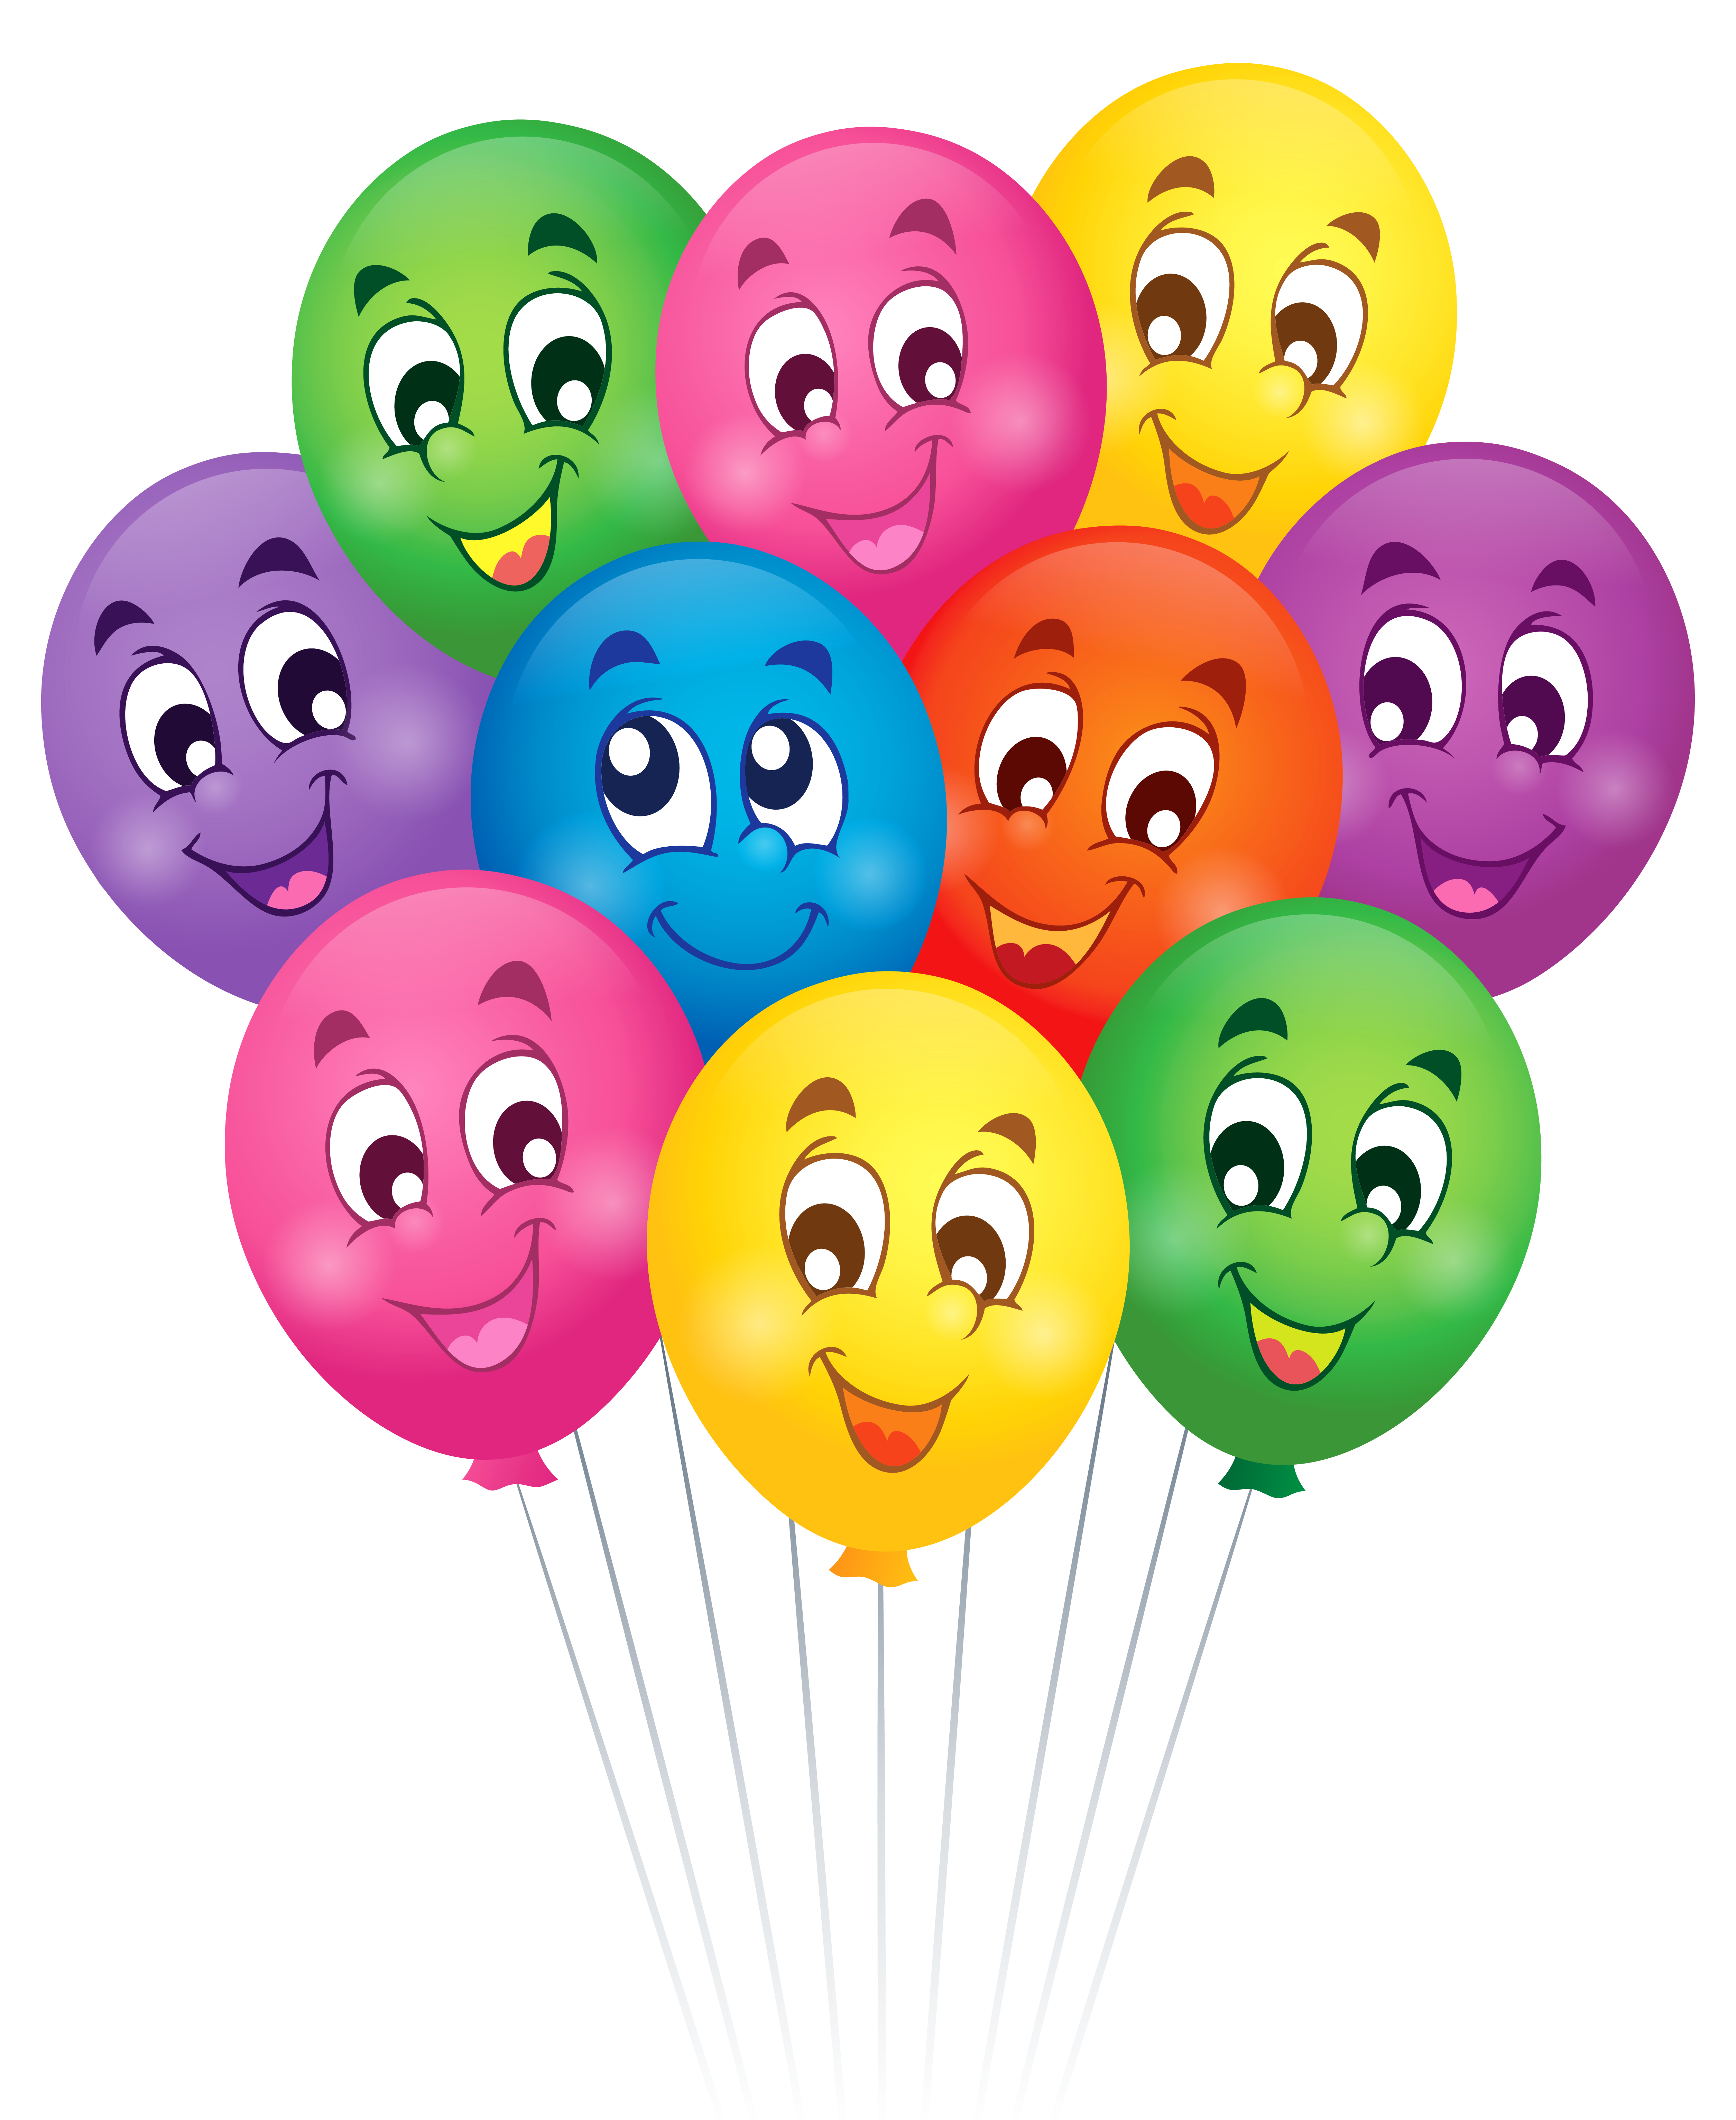 Balloons with Faces Cartoon PNG Clipart Picture | Gallery ...